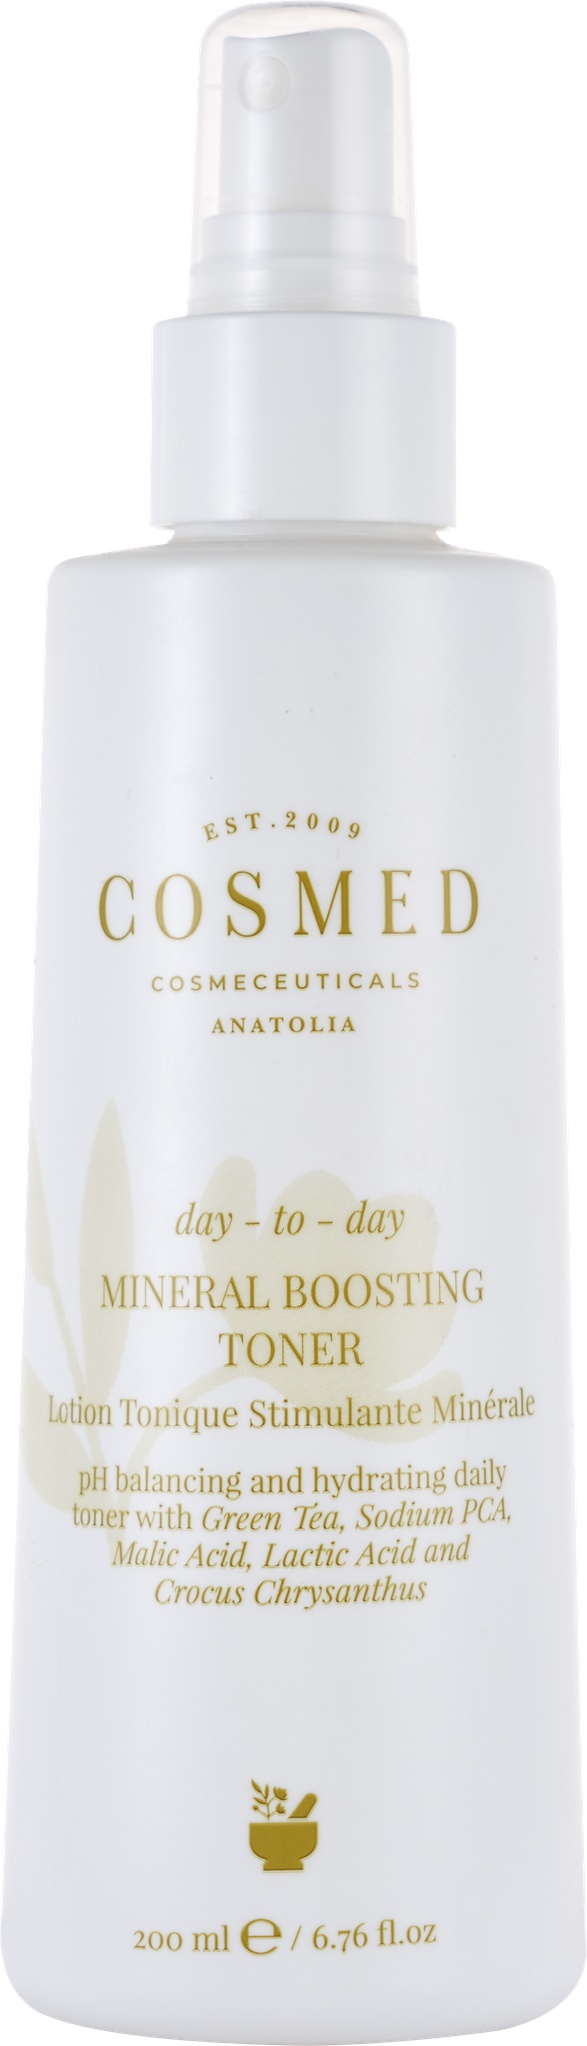 Cosmed Cosmeceuticals Day to Day - Mineral Boosting Toner